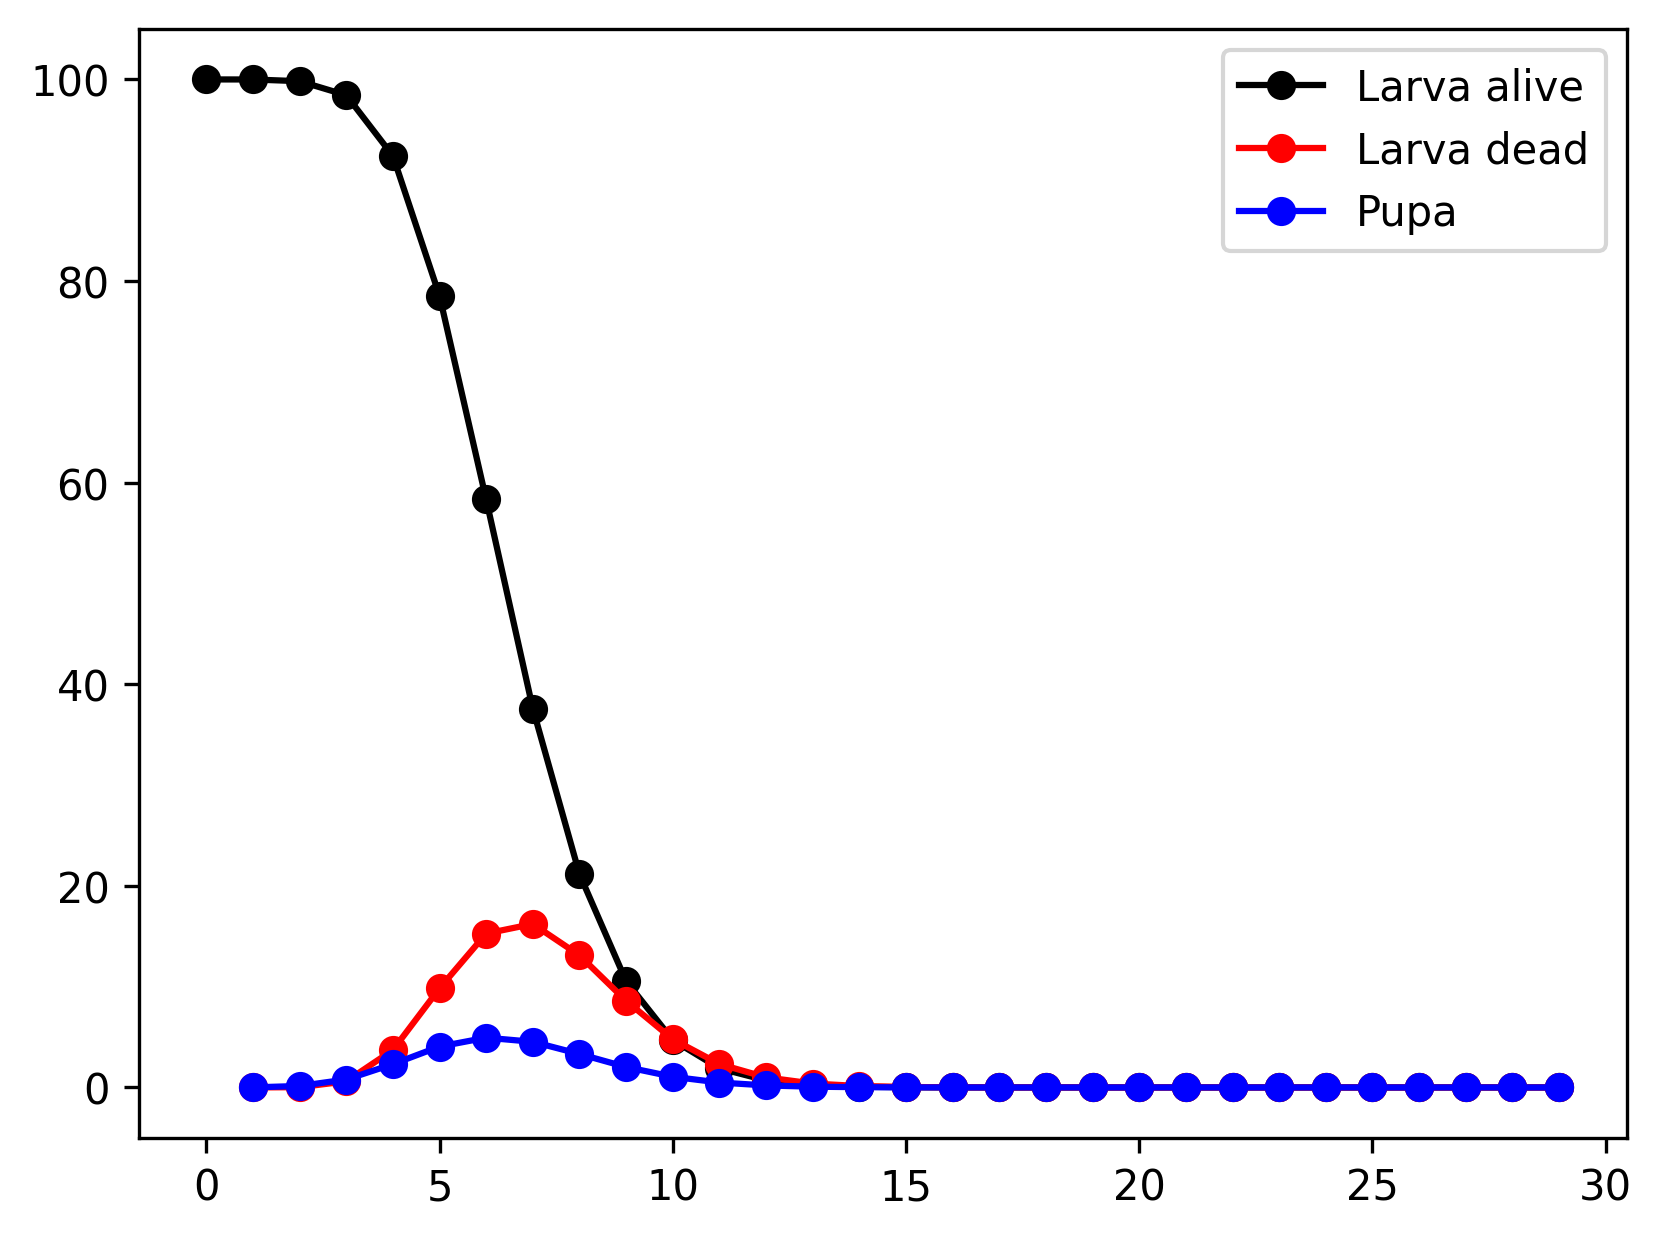 Erlang-distributed larva lifetime and development time